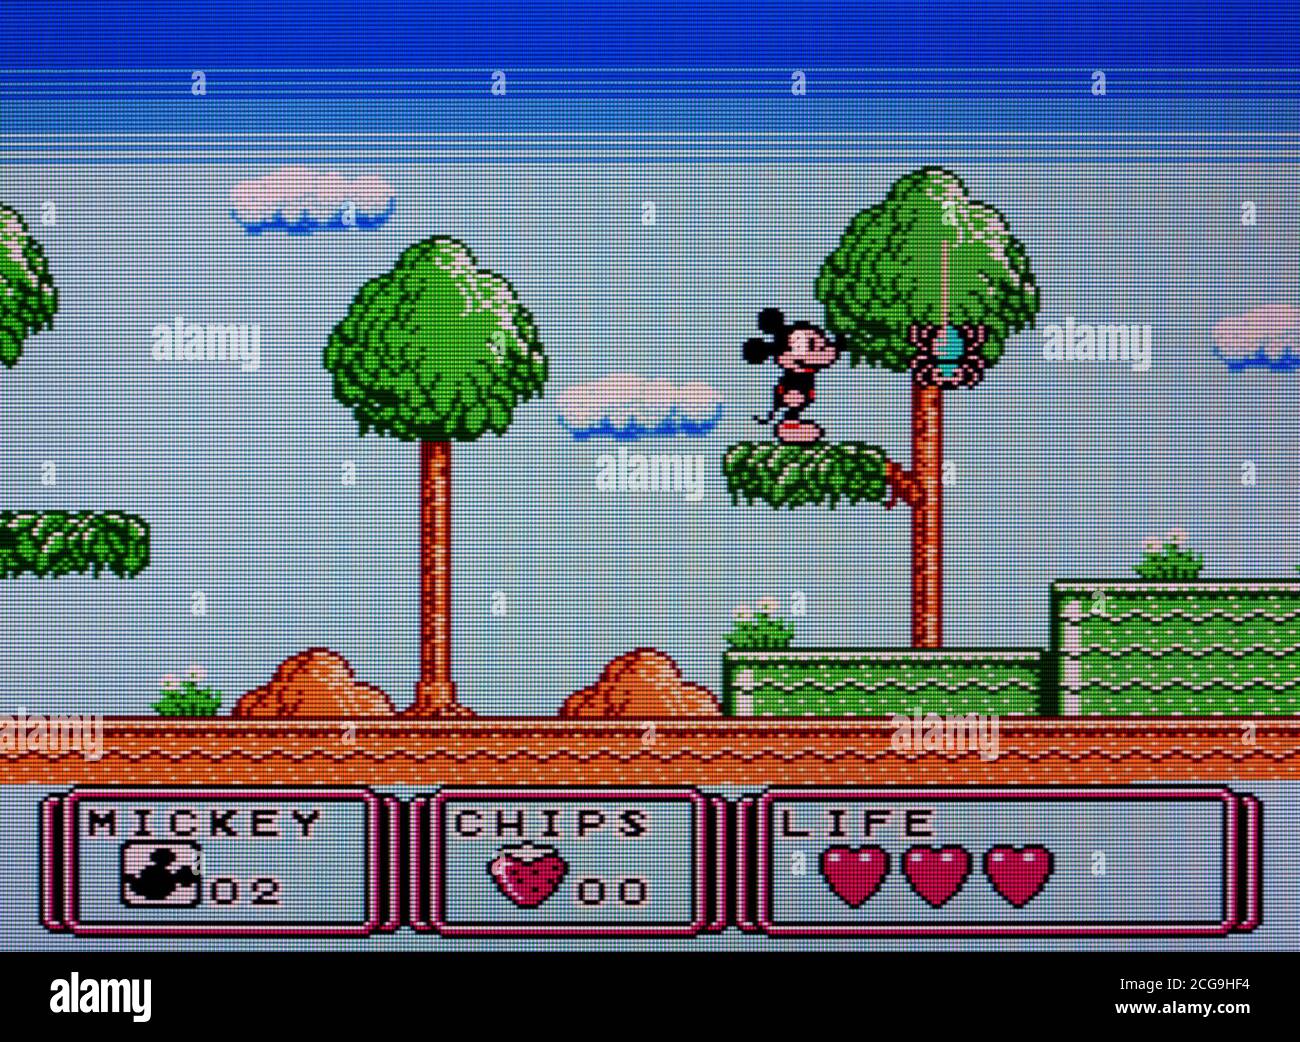 Mickey Mouse Dream Balloon - Nintendo Entertainment System - NES Videogame  - Editorial use only Stock Photo - Alamy